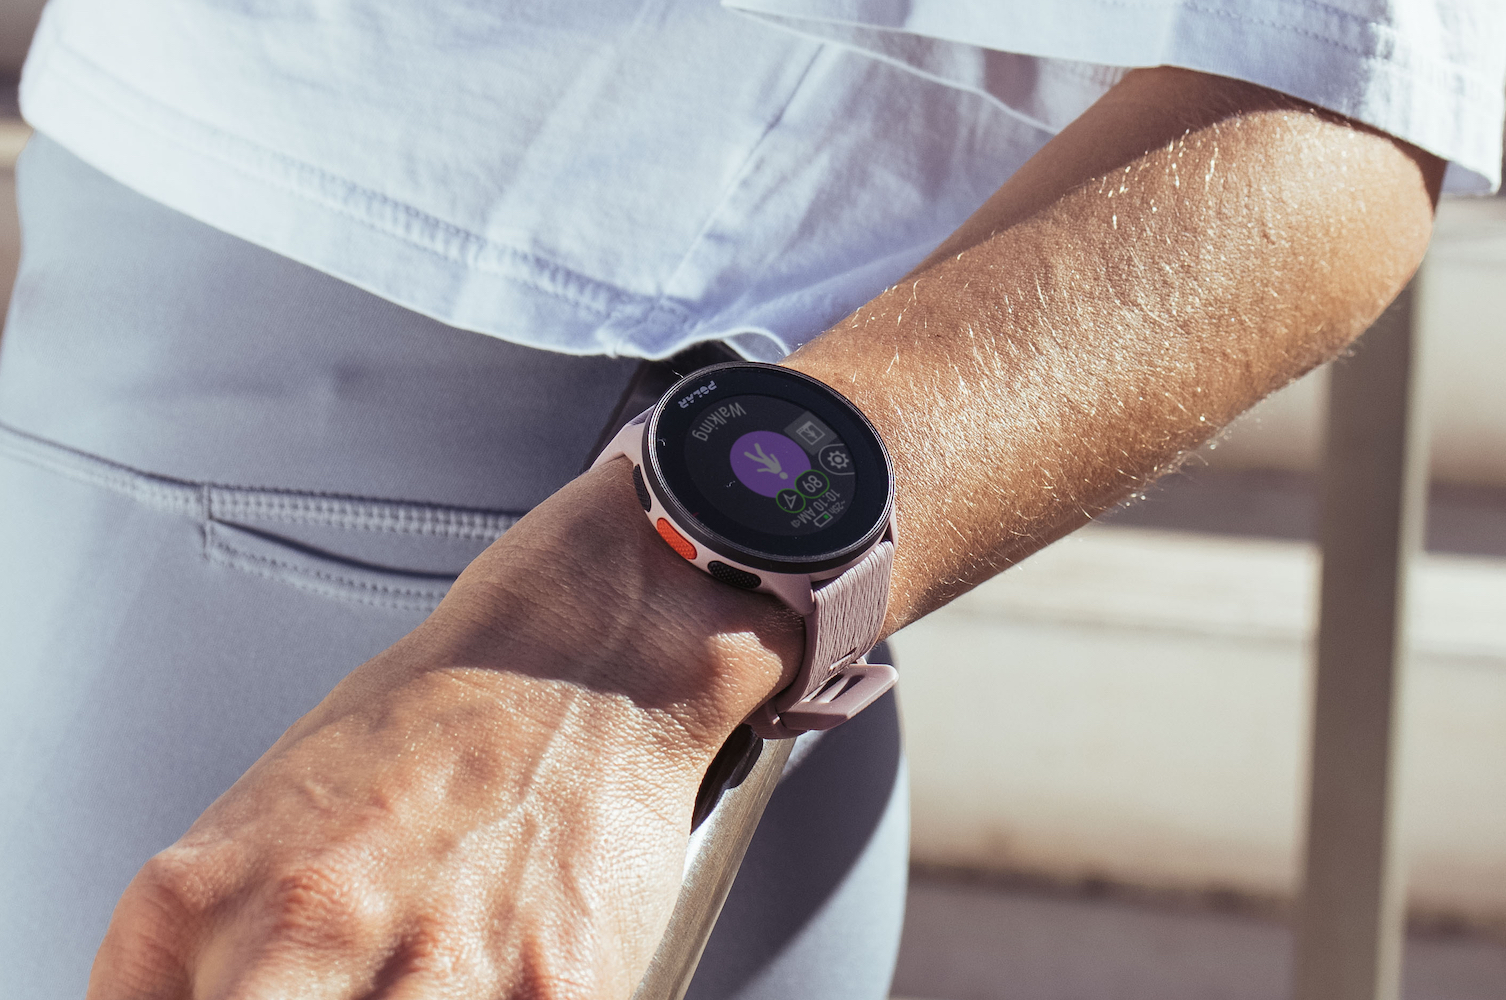 Polar's new Pacer smartwatches are for beginners and serious runners